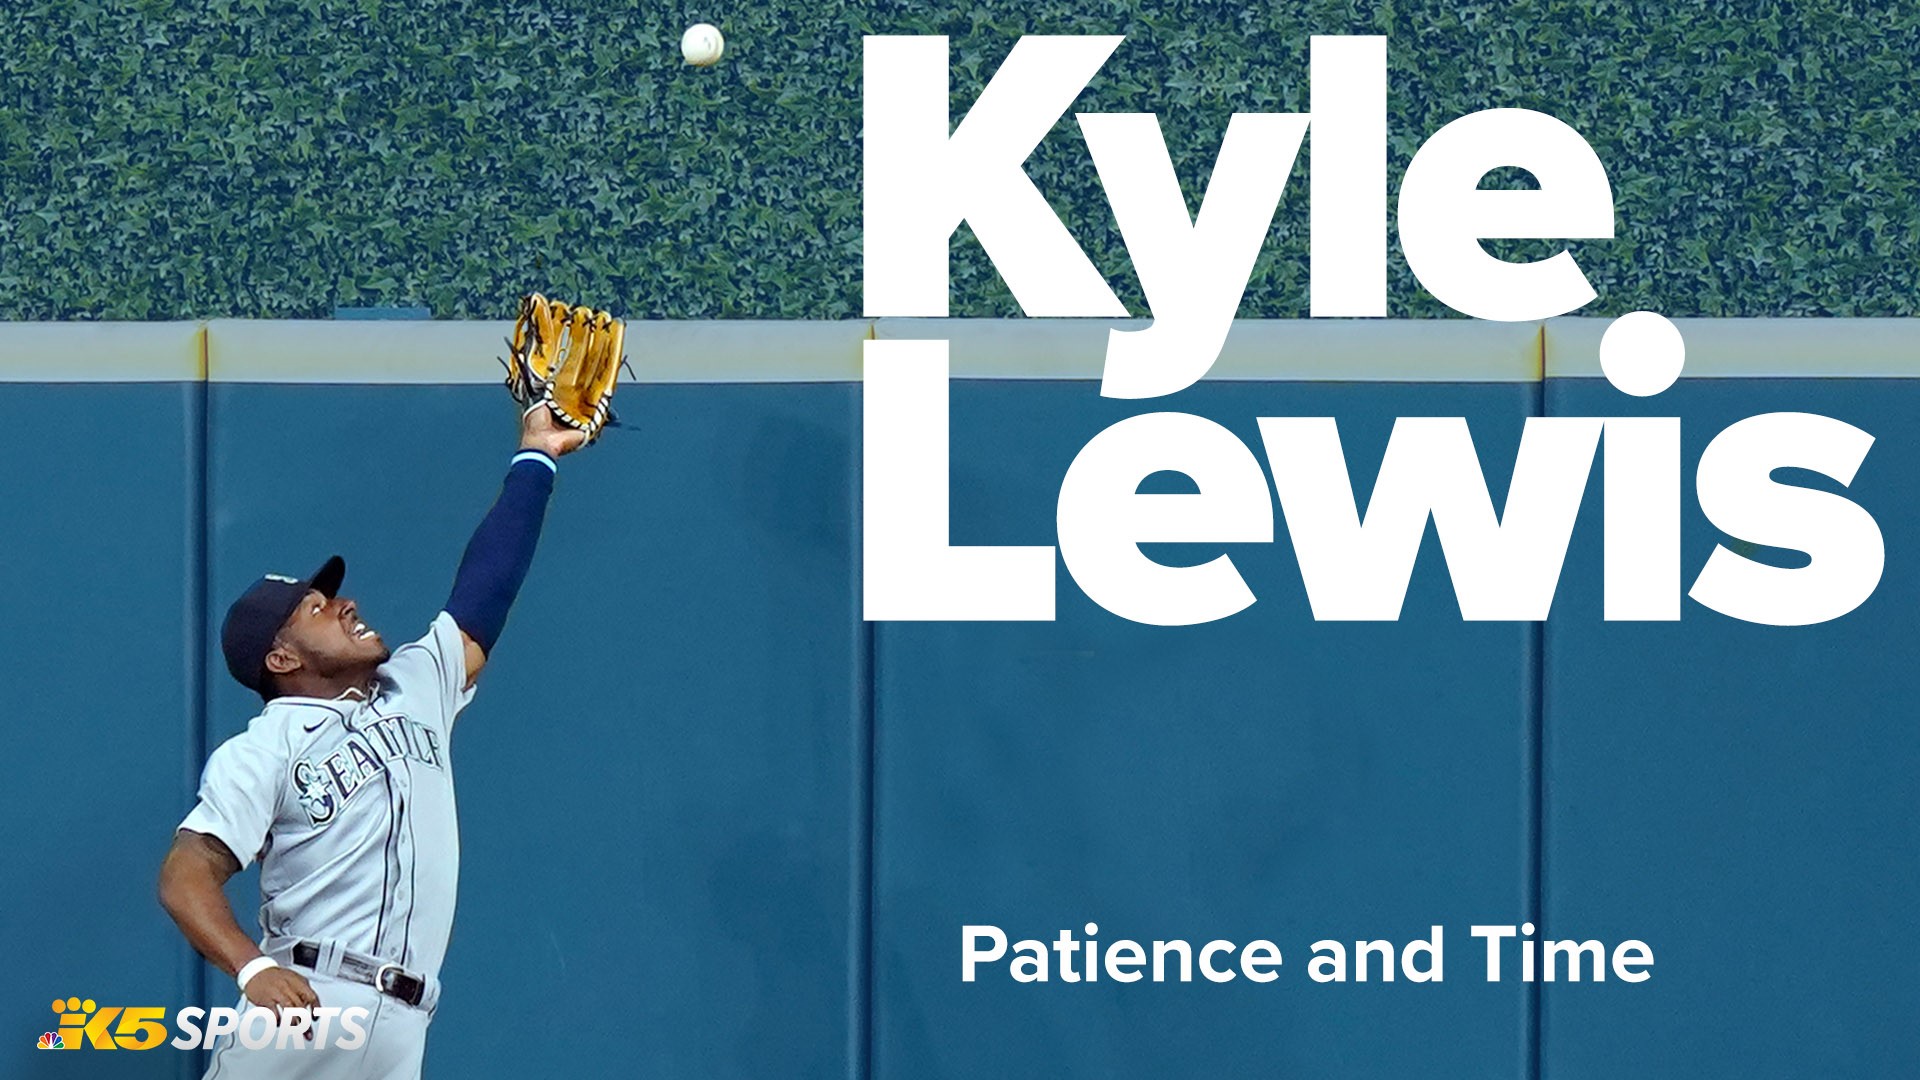 Mariners outfielder Kyle Lewis hopes to put together a big year